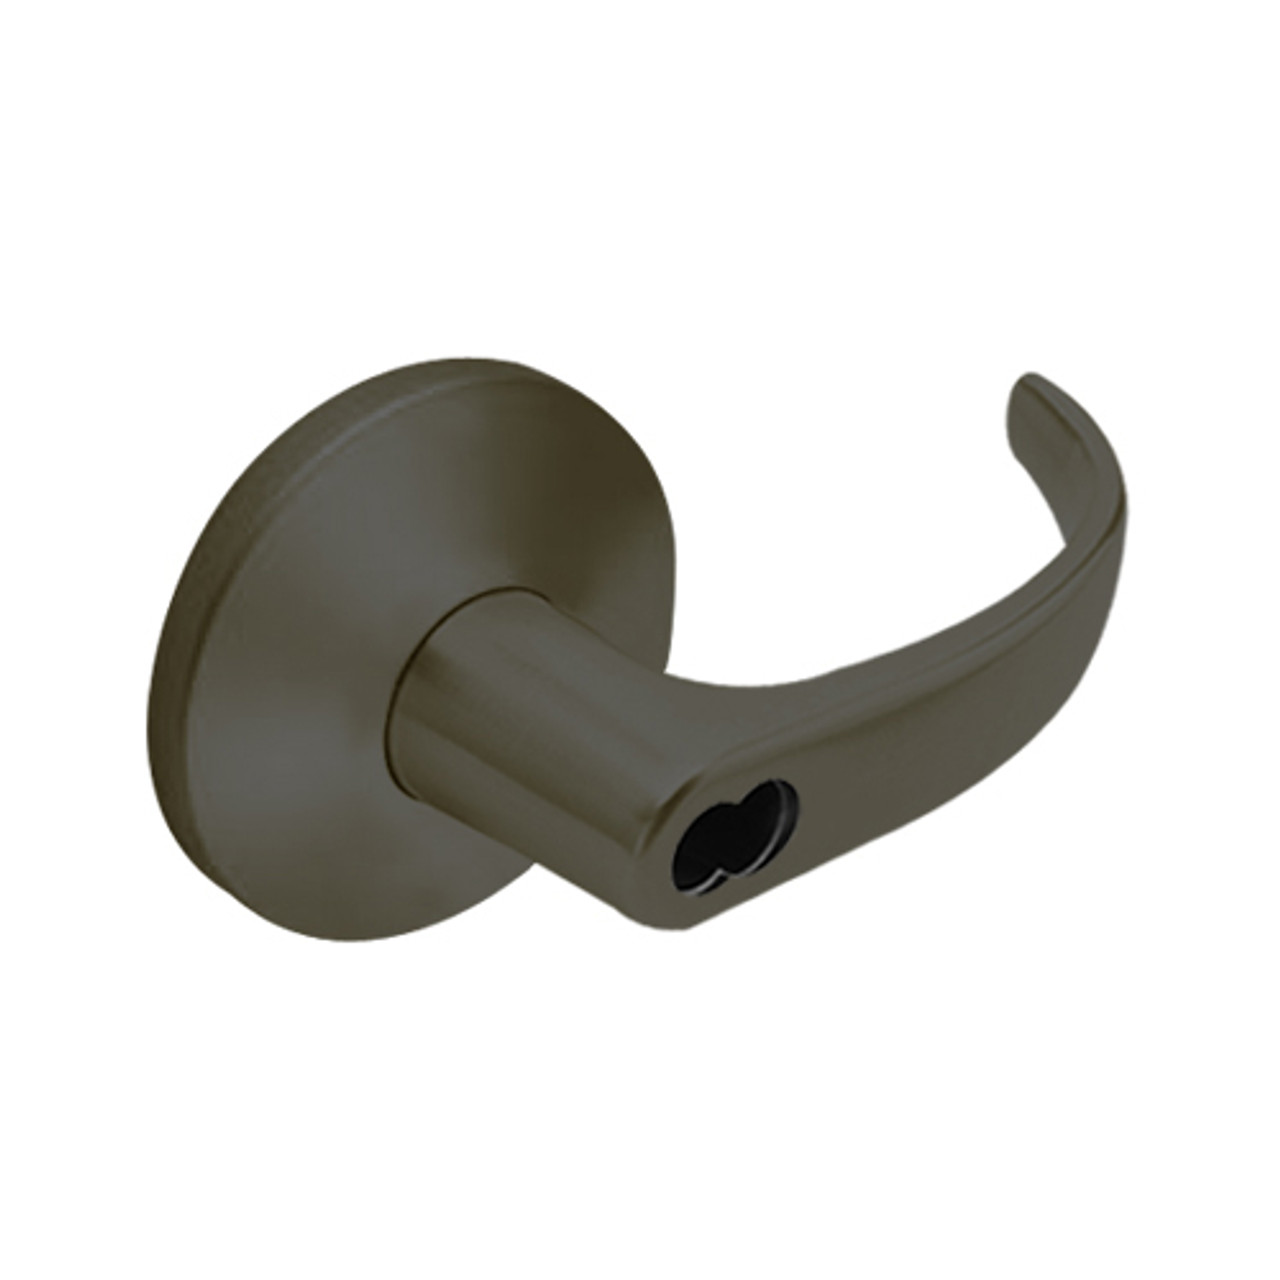 9K37YR14LS3613 Best 9K Series Special Function Cylindrical Lever Locks with Curved with Return Lever Design Accept 7 Pin Best Core in Oil Rubbed Bronze